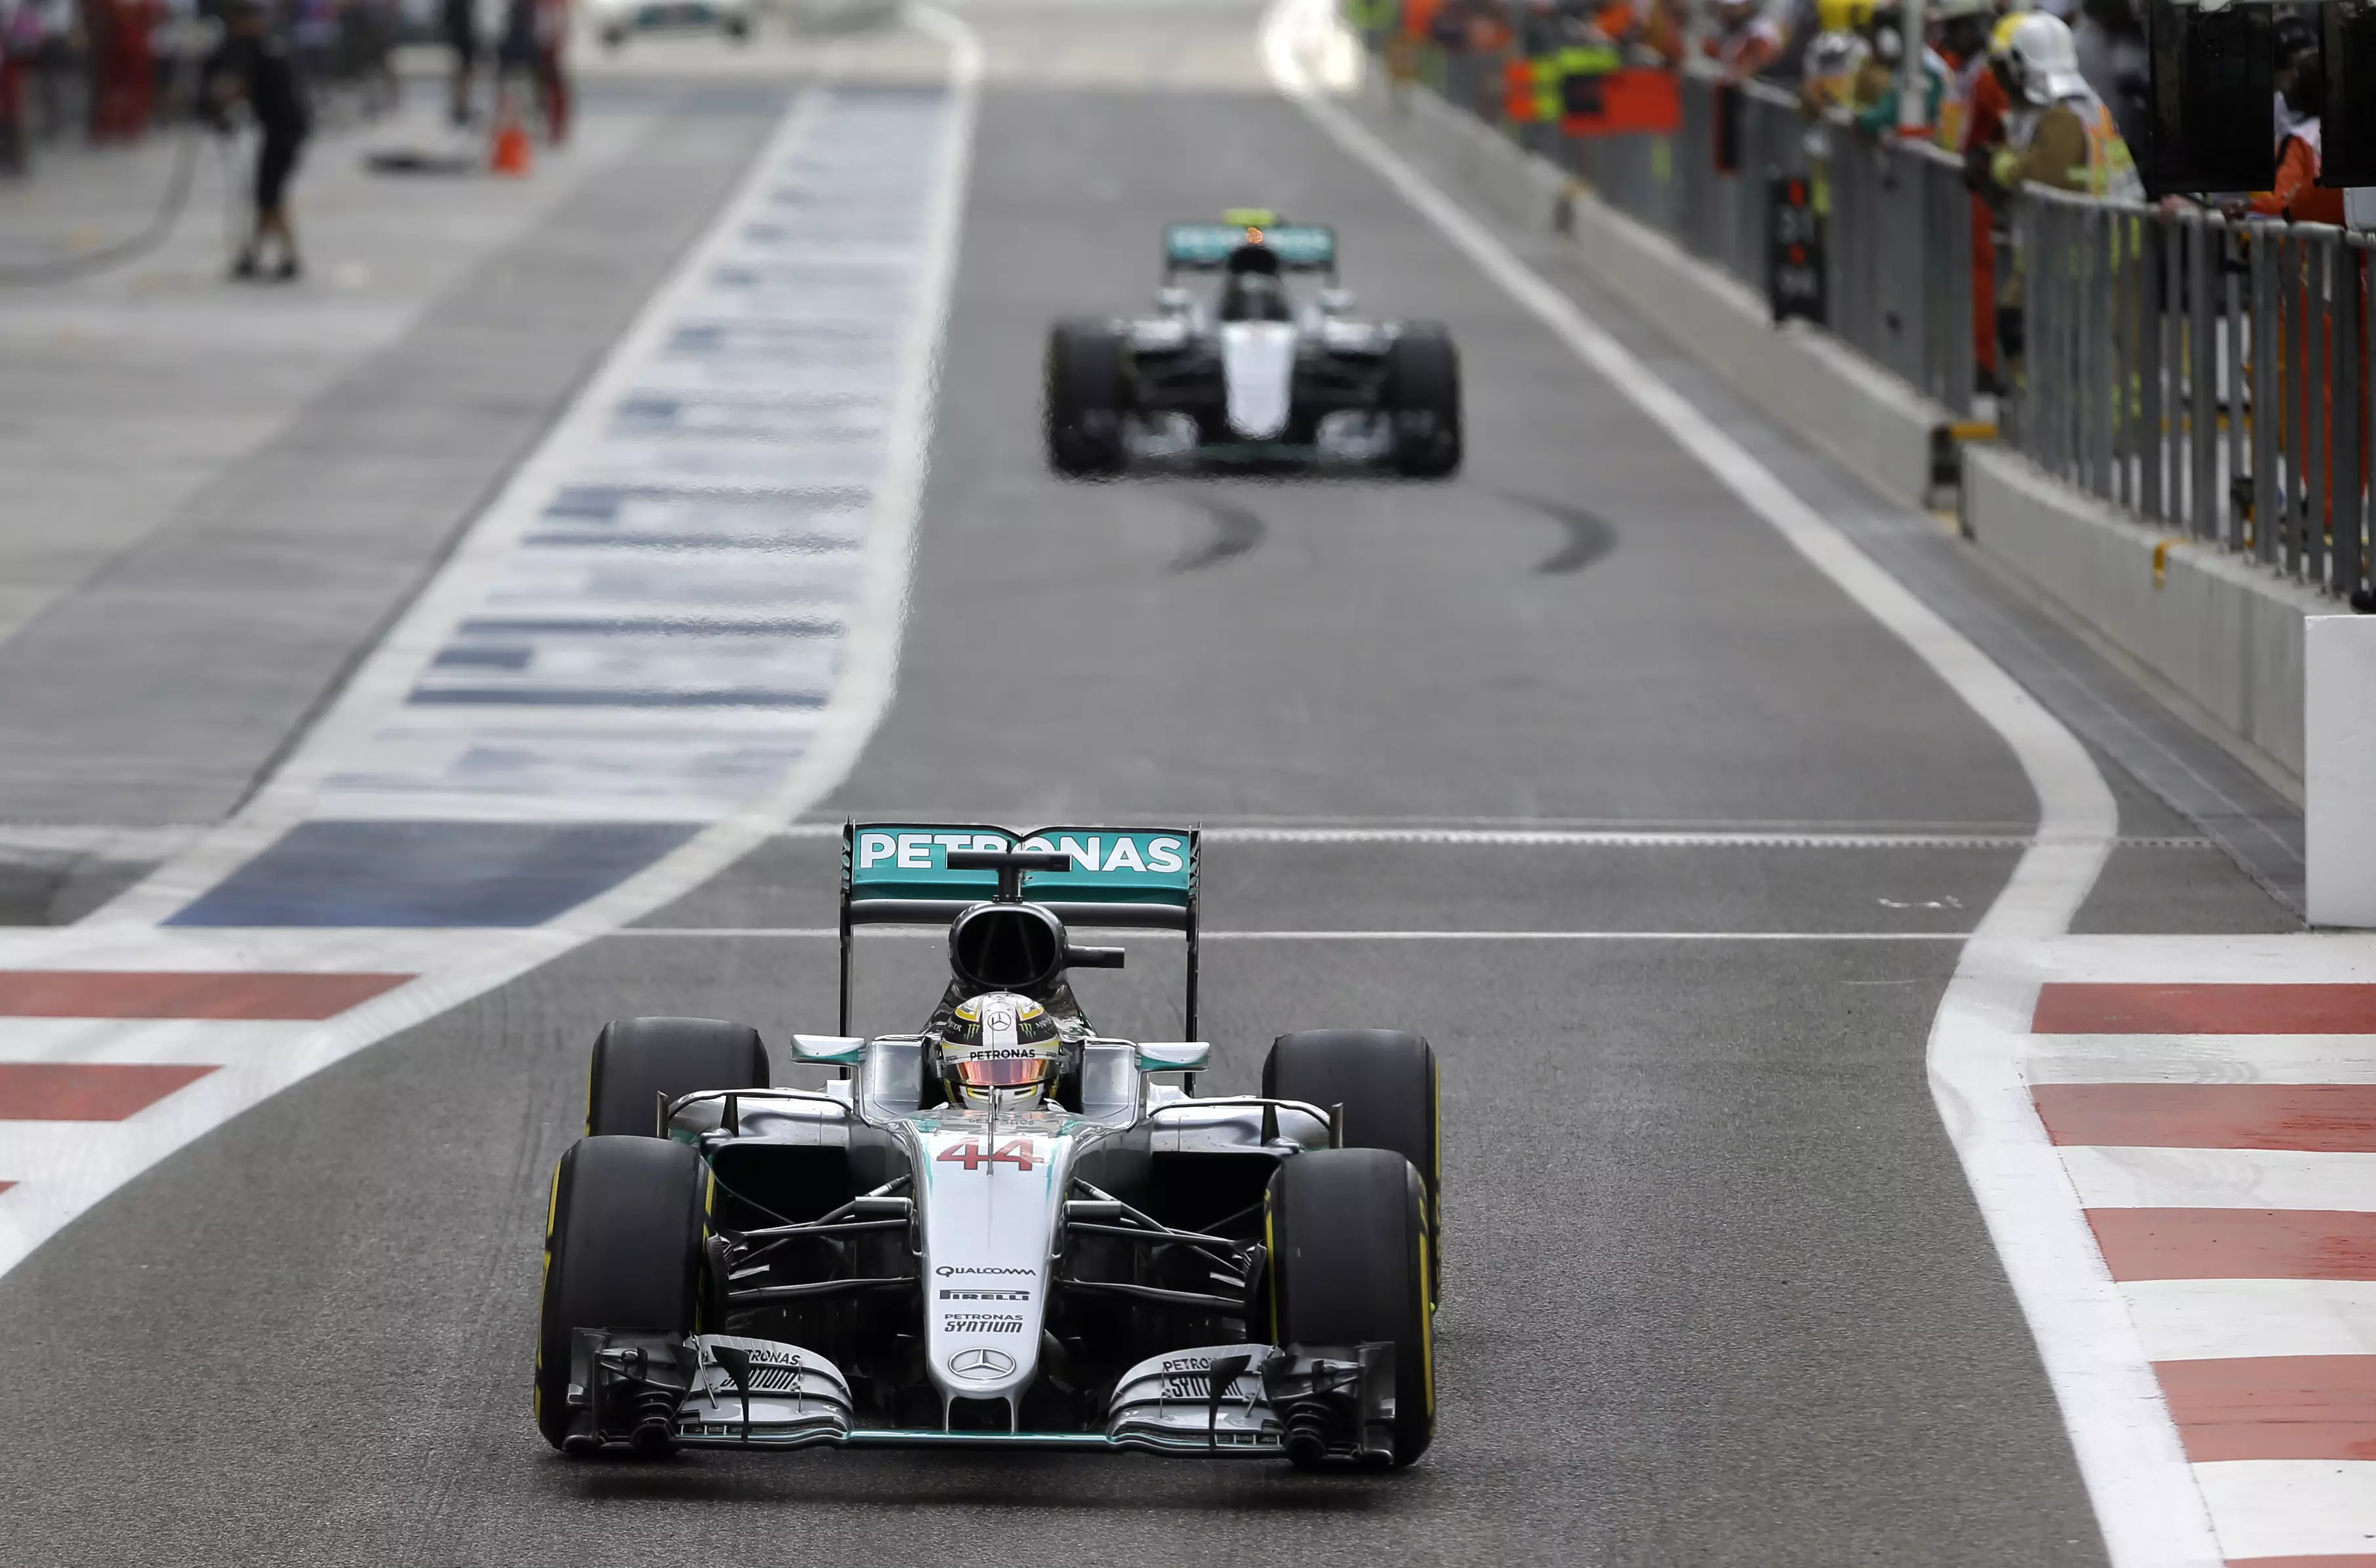 Lewis Hamilton And Nico Rosberg Go Head To Head For The Title